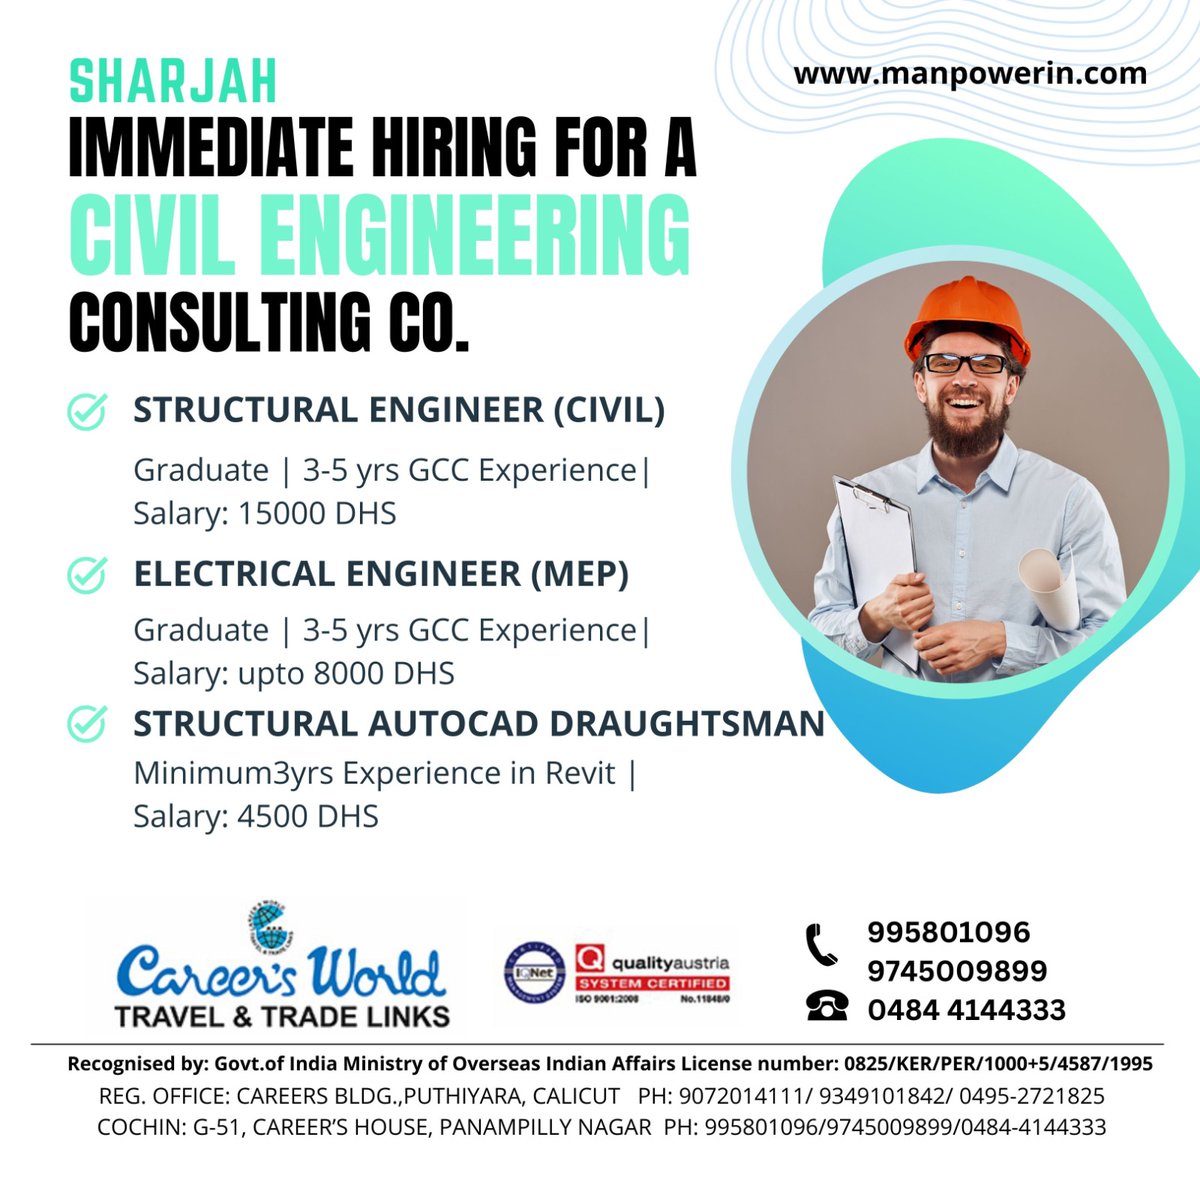 Job openings for a civil engineering consulting company in Sharjah
 manpowerin.com/job-openings-f… 
#consultingcompany #civilengineering #jobopenings